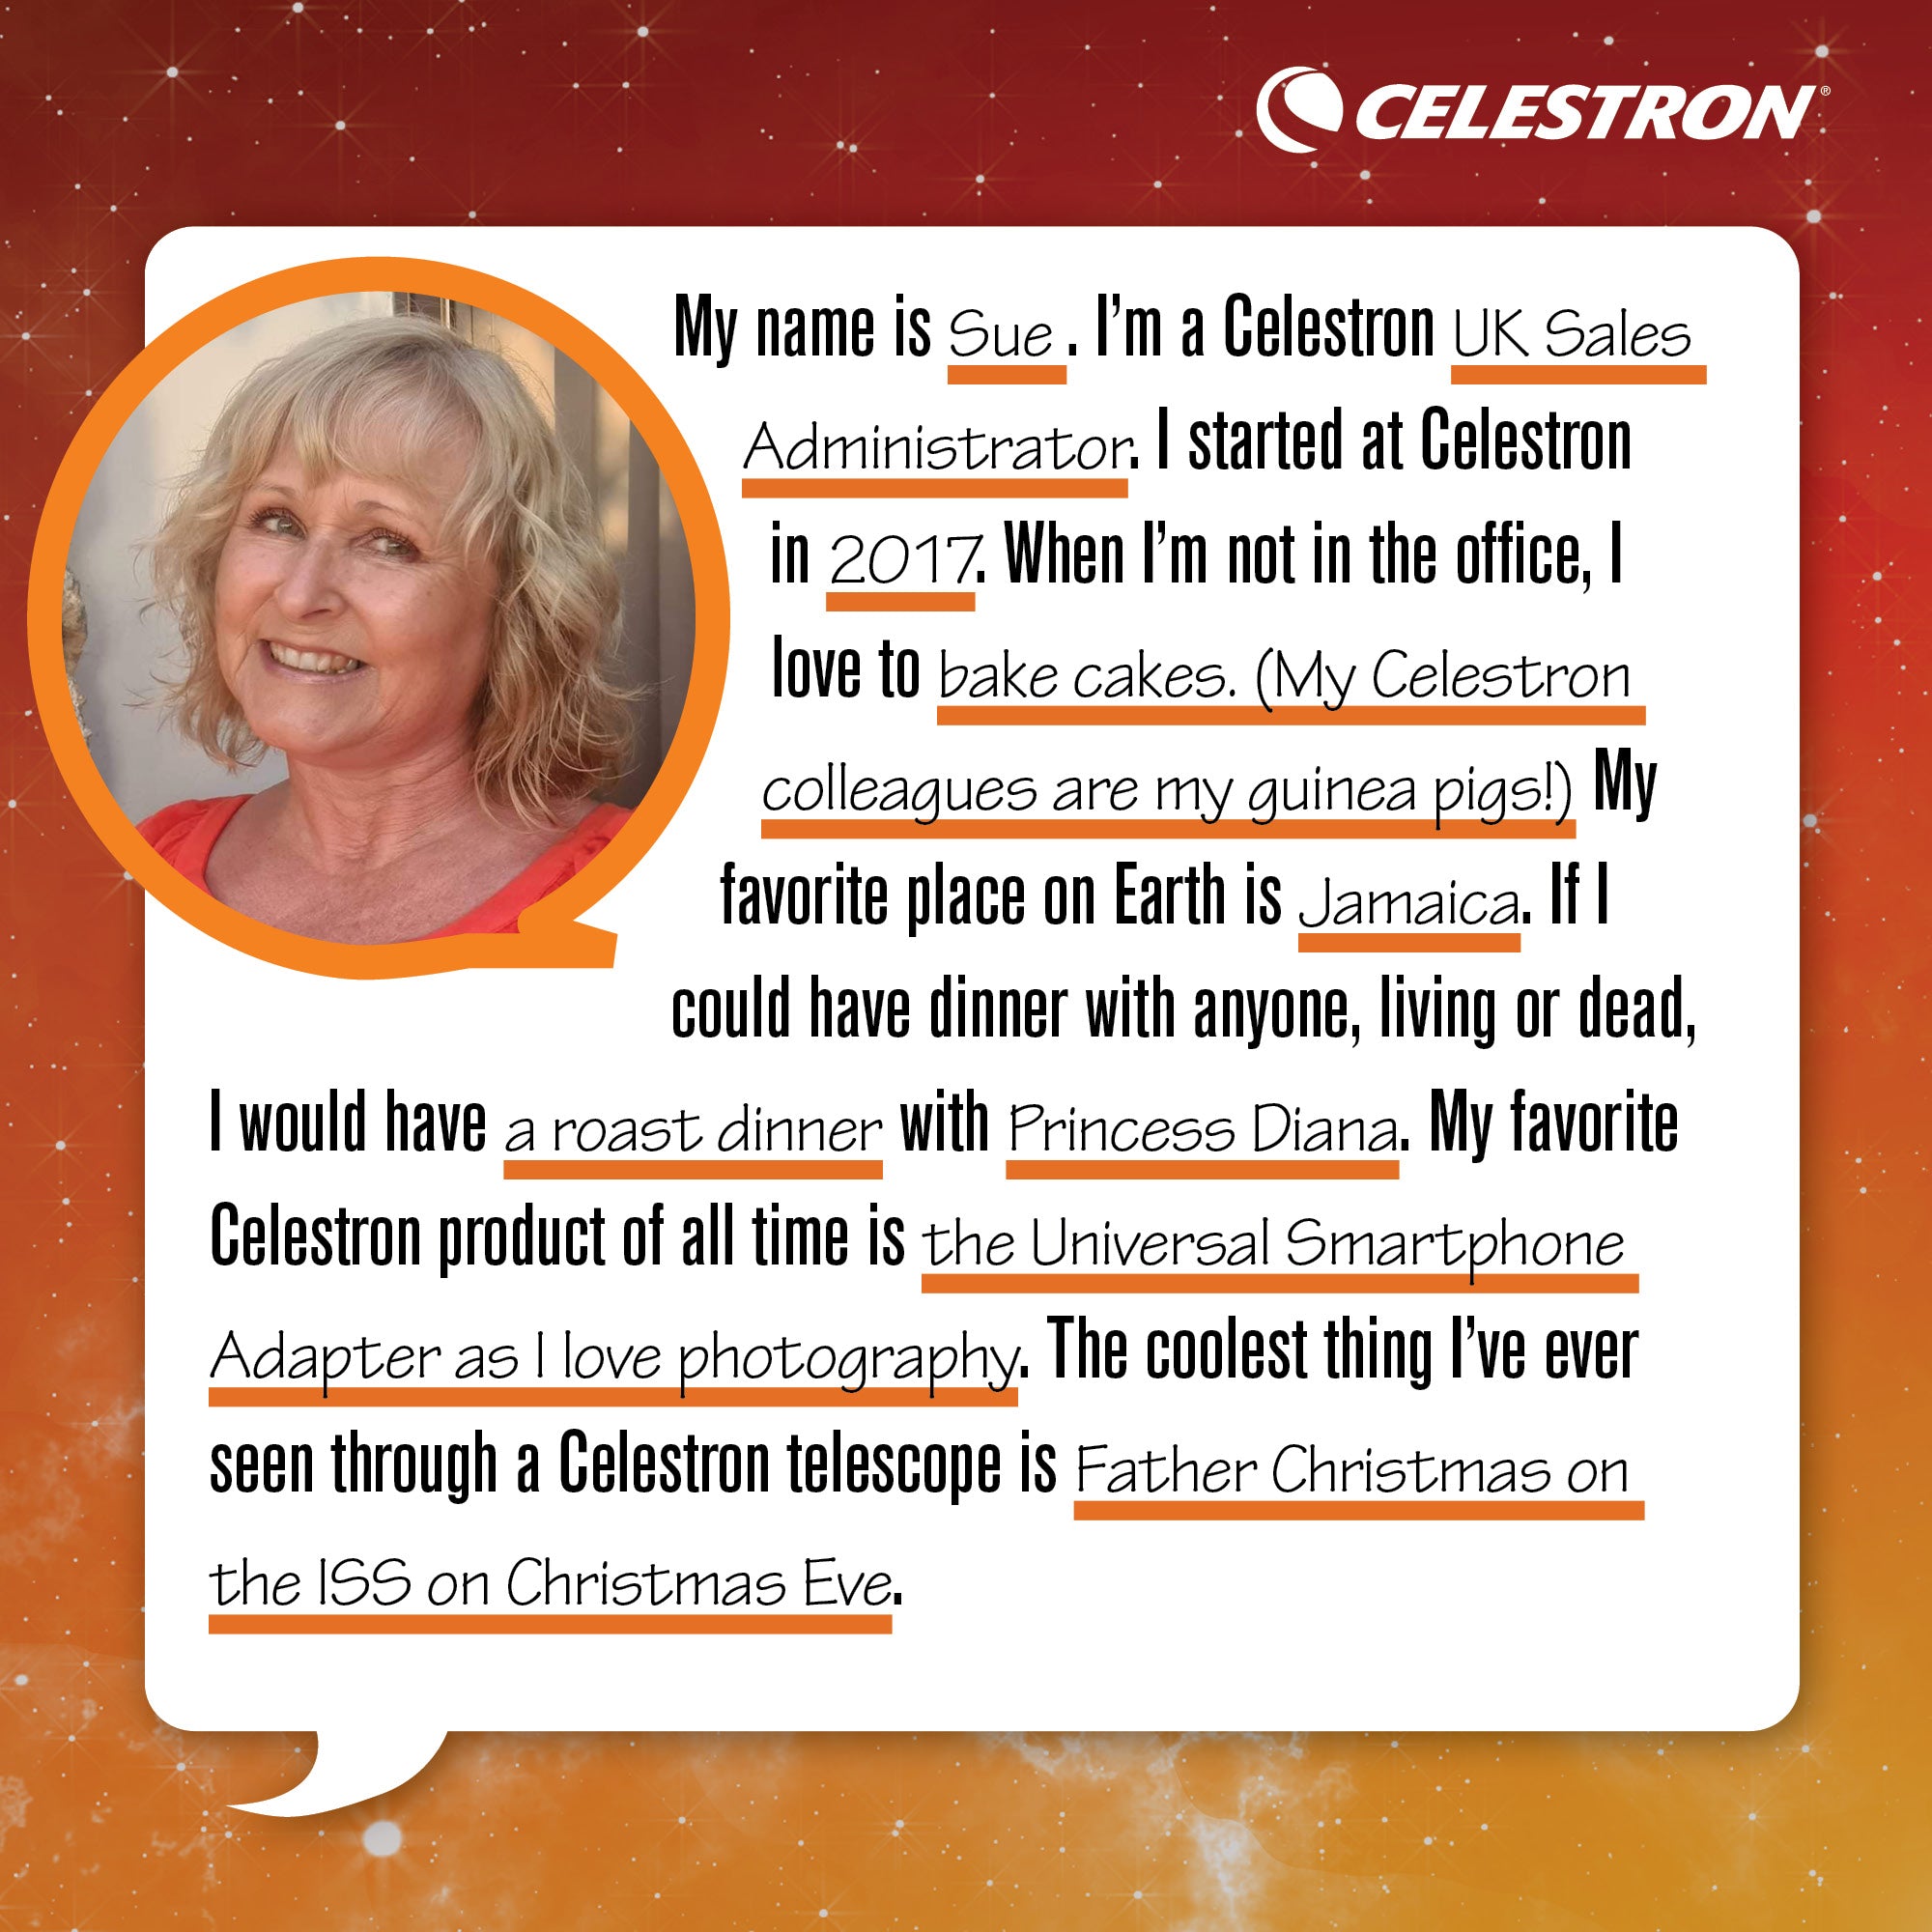 My name is Sue. I'm a Celestron UK Sales Administrator. I started at Celestron in 2017. When I'm not in the office, I love to bake cakes. (My Celestron colleagues are my guinea pigs!) My favorite place on Earth is Jamaica. If I could have dinner with anyone, living or dead, I would have a roast dinner with Princess Diana. My favorite Celestron product of all time is the Universal Smartphone Adapter as I love photography. The coolest thing I've ever seen through a Celestron telescope is Father Christmas on the ISS on Christmas Eve.